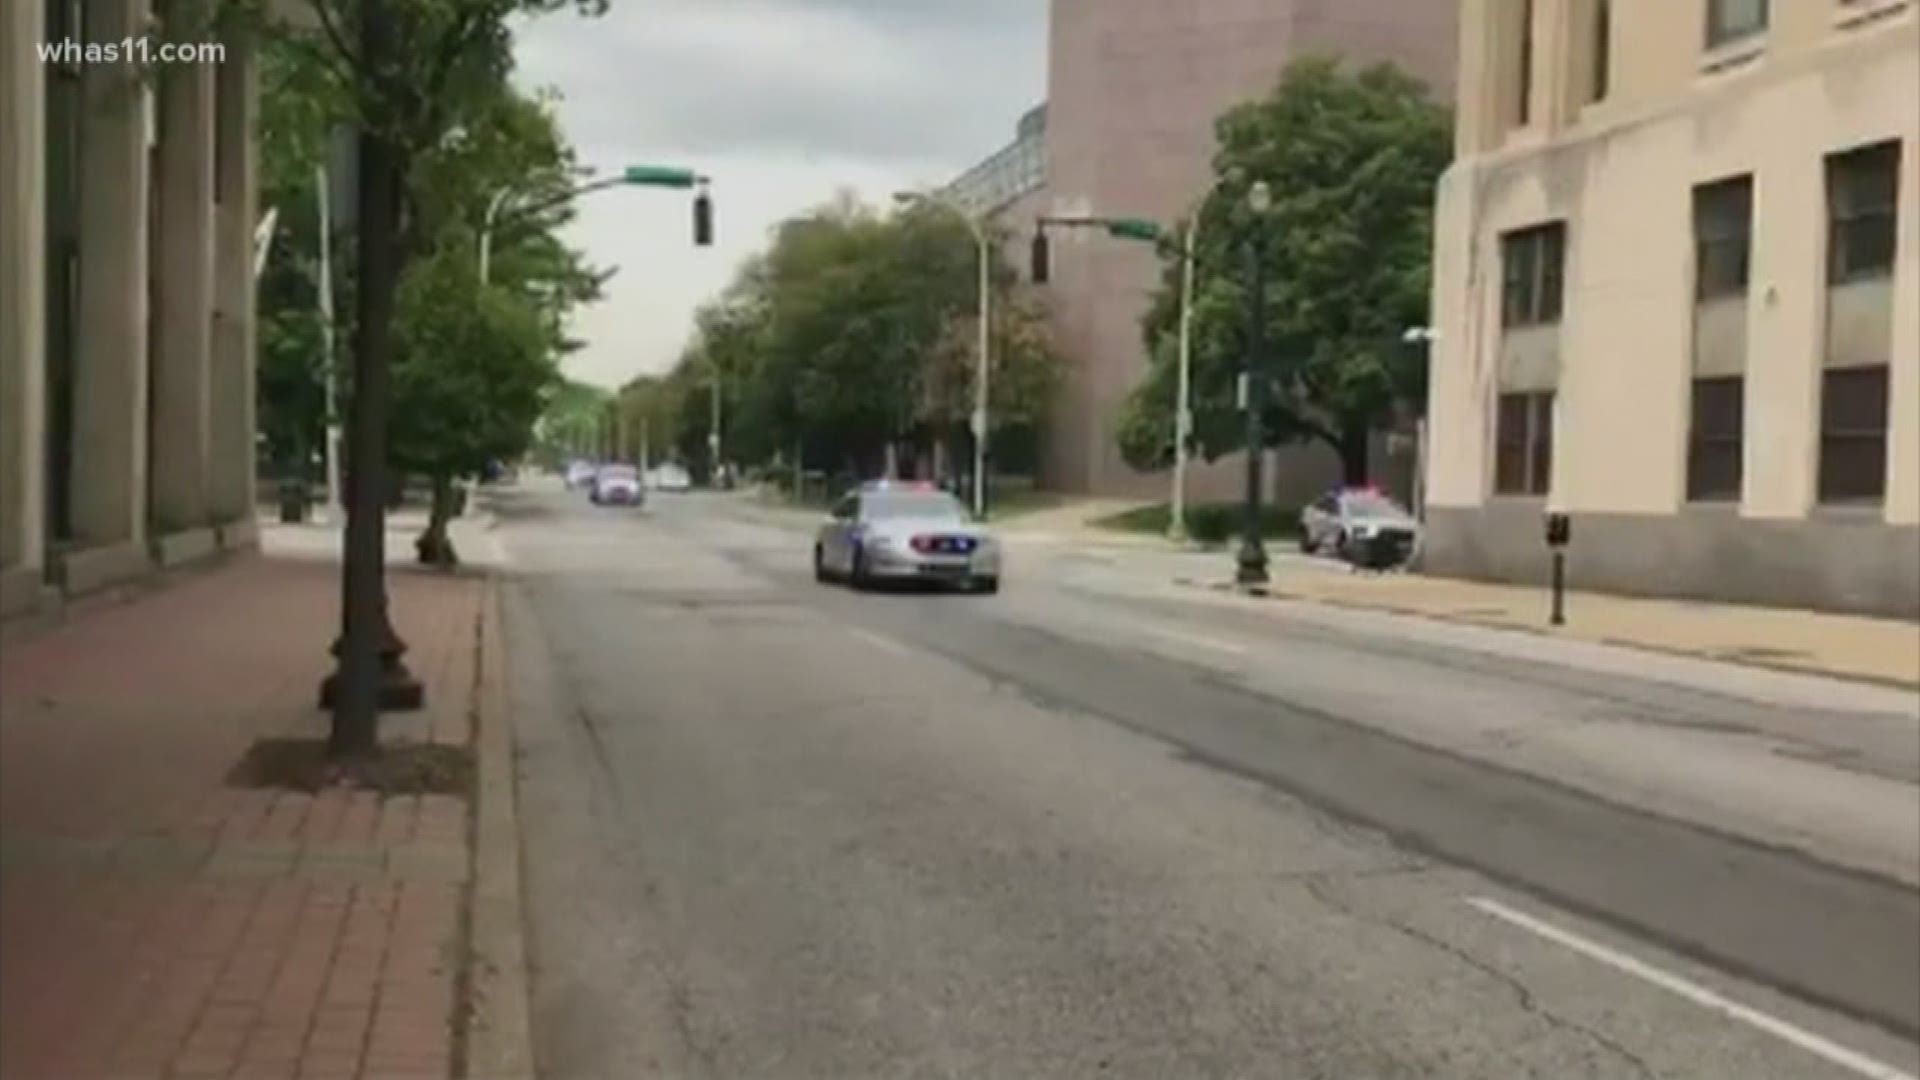 Police responded and it was a race against time as officers did not wait for an ambulance to arrive. Instead a fireman got into the back of a squad car and the toddler was rushed to hospital.